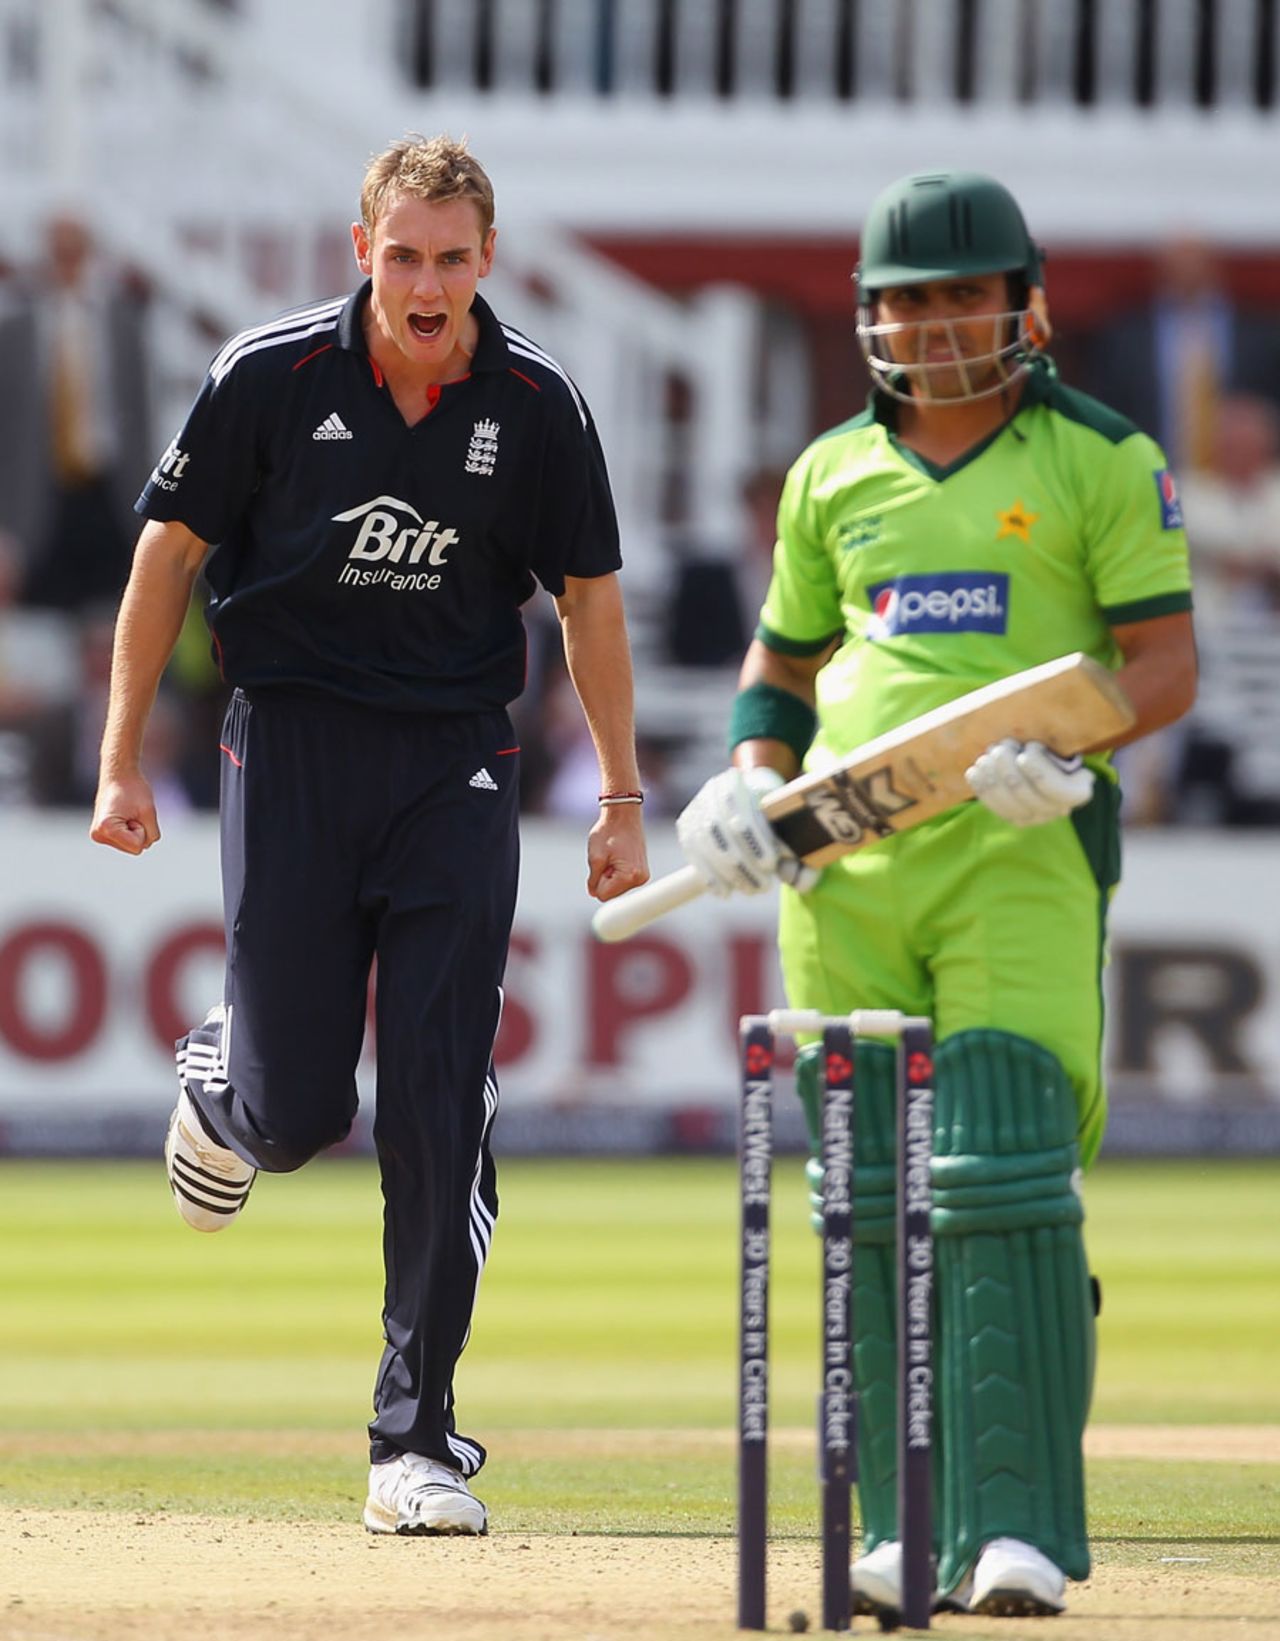 Stuart Broad removed Kamran Akmal with a well-directed bouncer, England v Pakistan, 4th ODI, Lord's, September 20, 2010